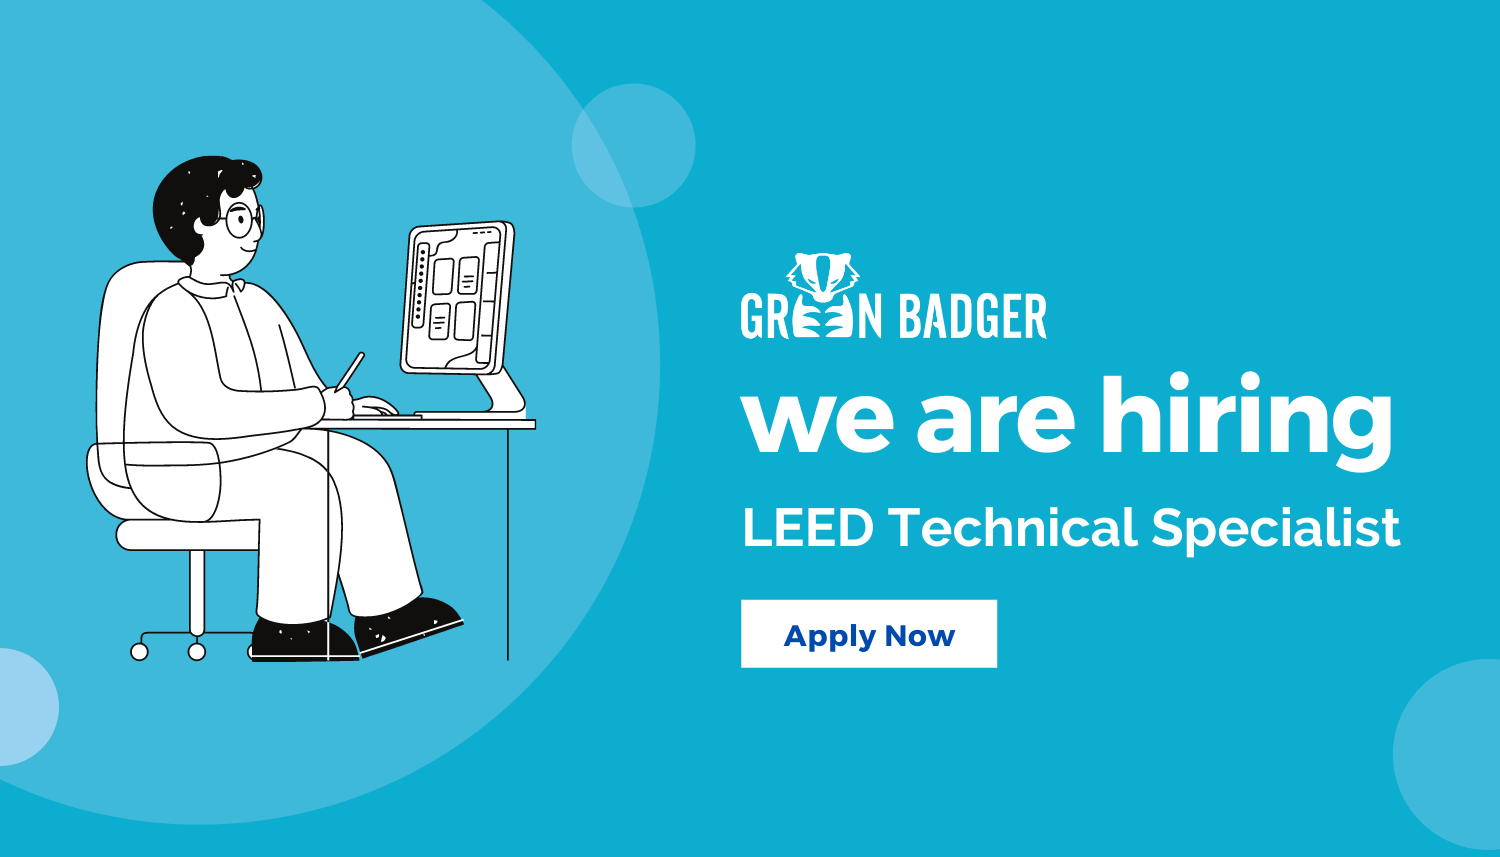 LEED Technical Specialist